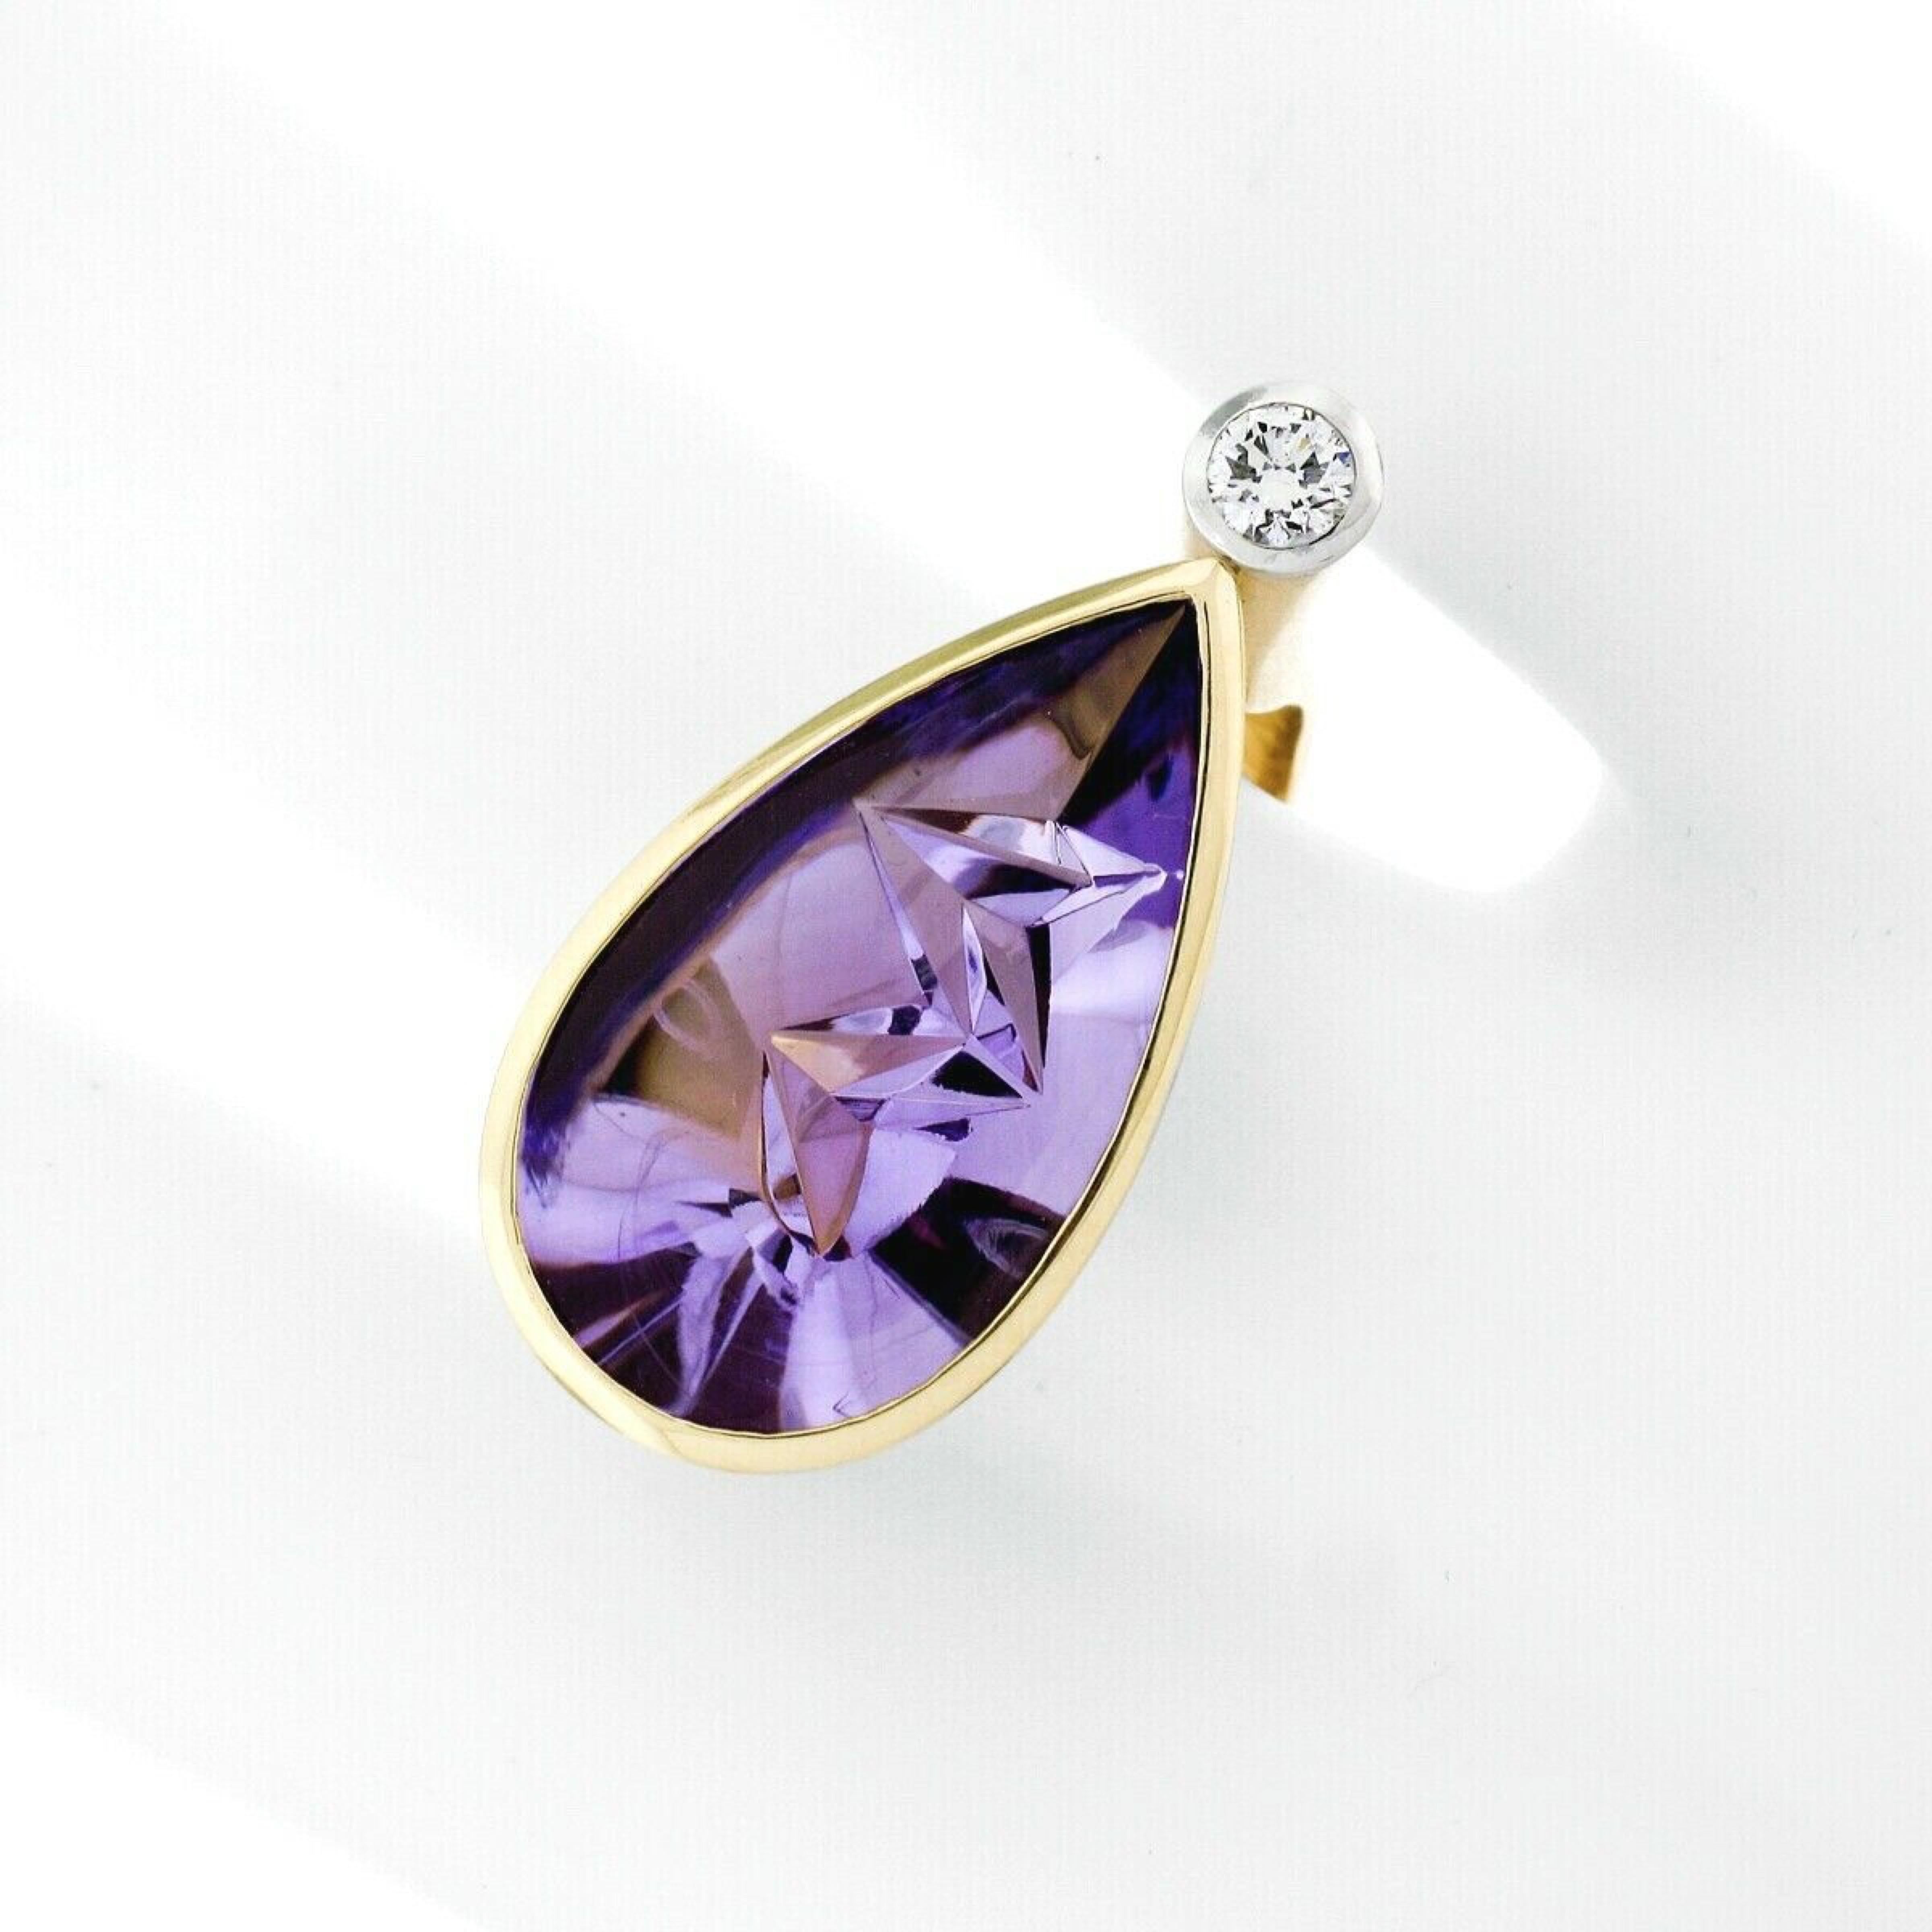 18k Yellow Gold Atelier Munsteiner Icicle Cut Amethyst Diamond Ring w/ Papers 1